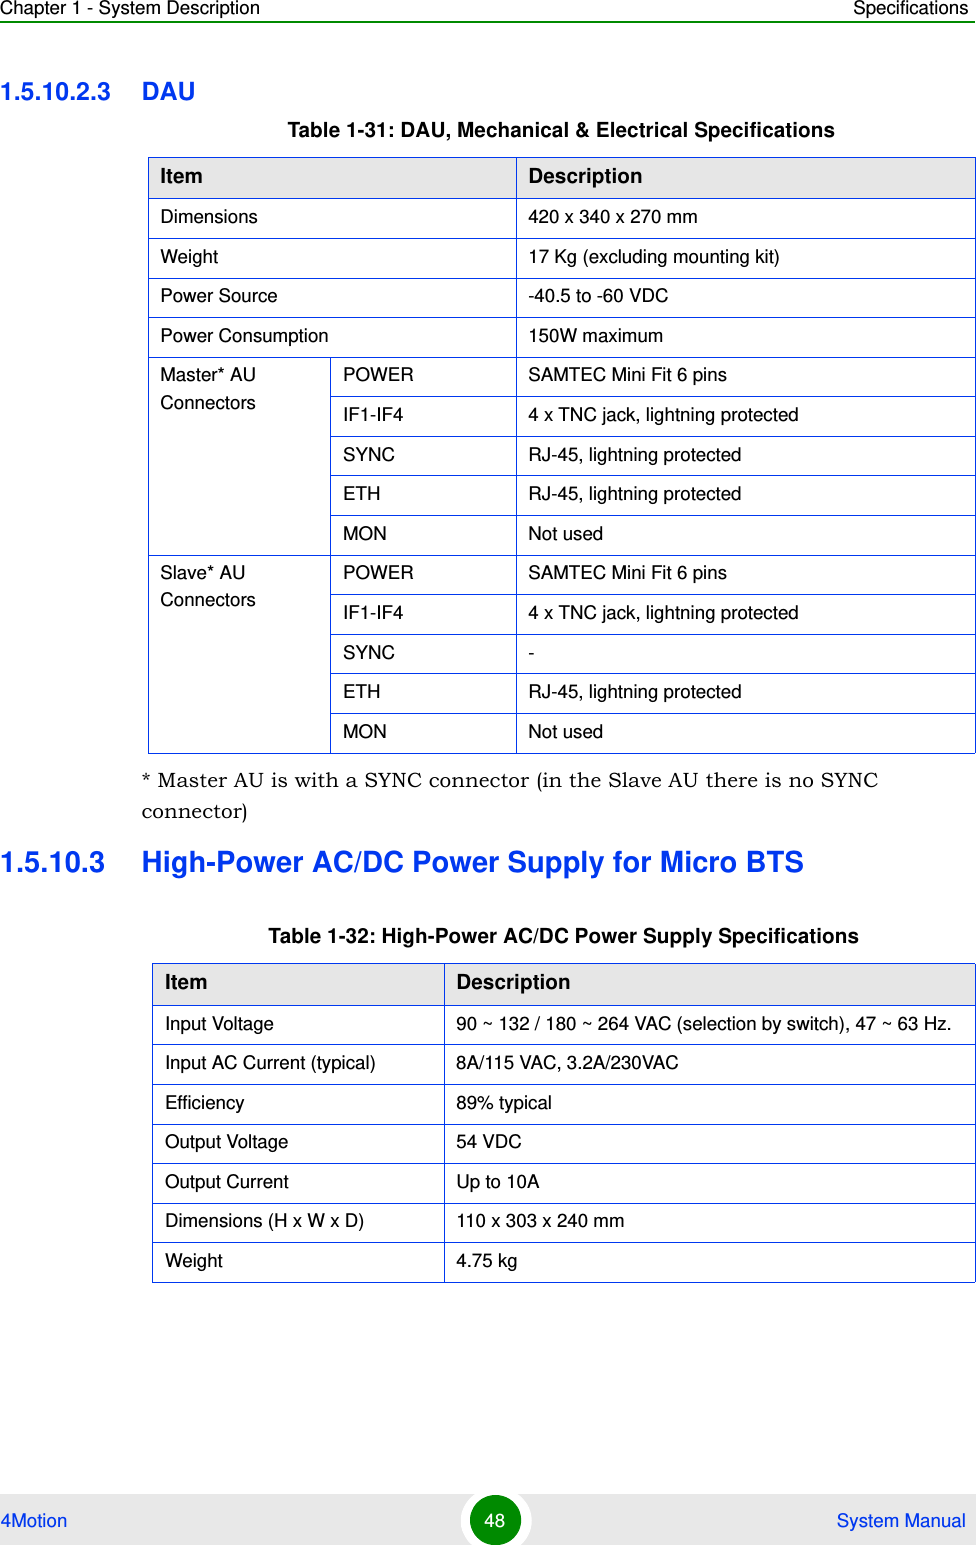 Chapter 1 - System Description Specifications4Motion 48  System Manual1.5.10.2.3 DAU* Master AU is with a SYNC connector (in the Slave AU there is no SYNC connector)1.5.10.3 High-Power AC/DC Power Supply for Micro BTSTable 1-31: DAU, Mechanical &amp; Electrical SpecificationsItem DescriptionDimensions 420 x 340 x 270 mmWeight 17 Kg (excluding mounting kit)Power Source -40.5 to -60 VDCPower Consumption 150W maximumMaster* AU ConnectorsPOWER SAMTEC Mini Fit 6 pinsIF1-IF4 4 x TNC jack, lightning protectedSYNC RJ-45, lightning protectedETH RJ-45, lightning protectedMON Not usedSlave* AU ConnectorsPOWER SAMTEC Mini Fit 6 pinsIF1-IF4 4 x TNC jack, lightning protectedSYNC -ETH RJ-45, lightning protectedMON Not usedTable 1-32: High-Power AC/DC Power Supply SpecificationsItem DescriptionInput Voltage 90 ~ 132 / 180 ~ 264 VAC (selection by switch), 47 ~ 63 Hz.Input AC Current (typical) 8A/115 VAC, 3.2A/230VACEfficiency 89% typicalOutput Voltage 54 VDCOutput Current Up to 10ADimensions (H x W x D) 110 x 303 x 240 mmWeight 4.75 kg